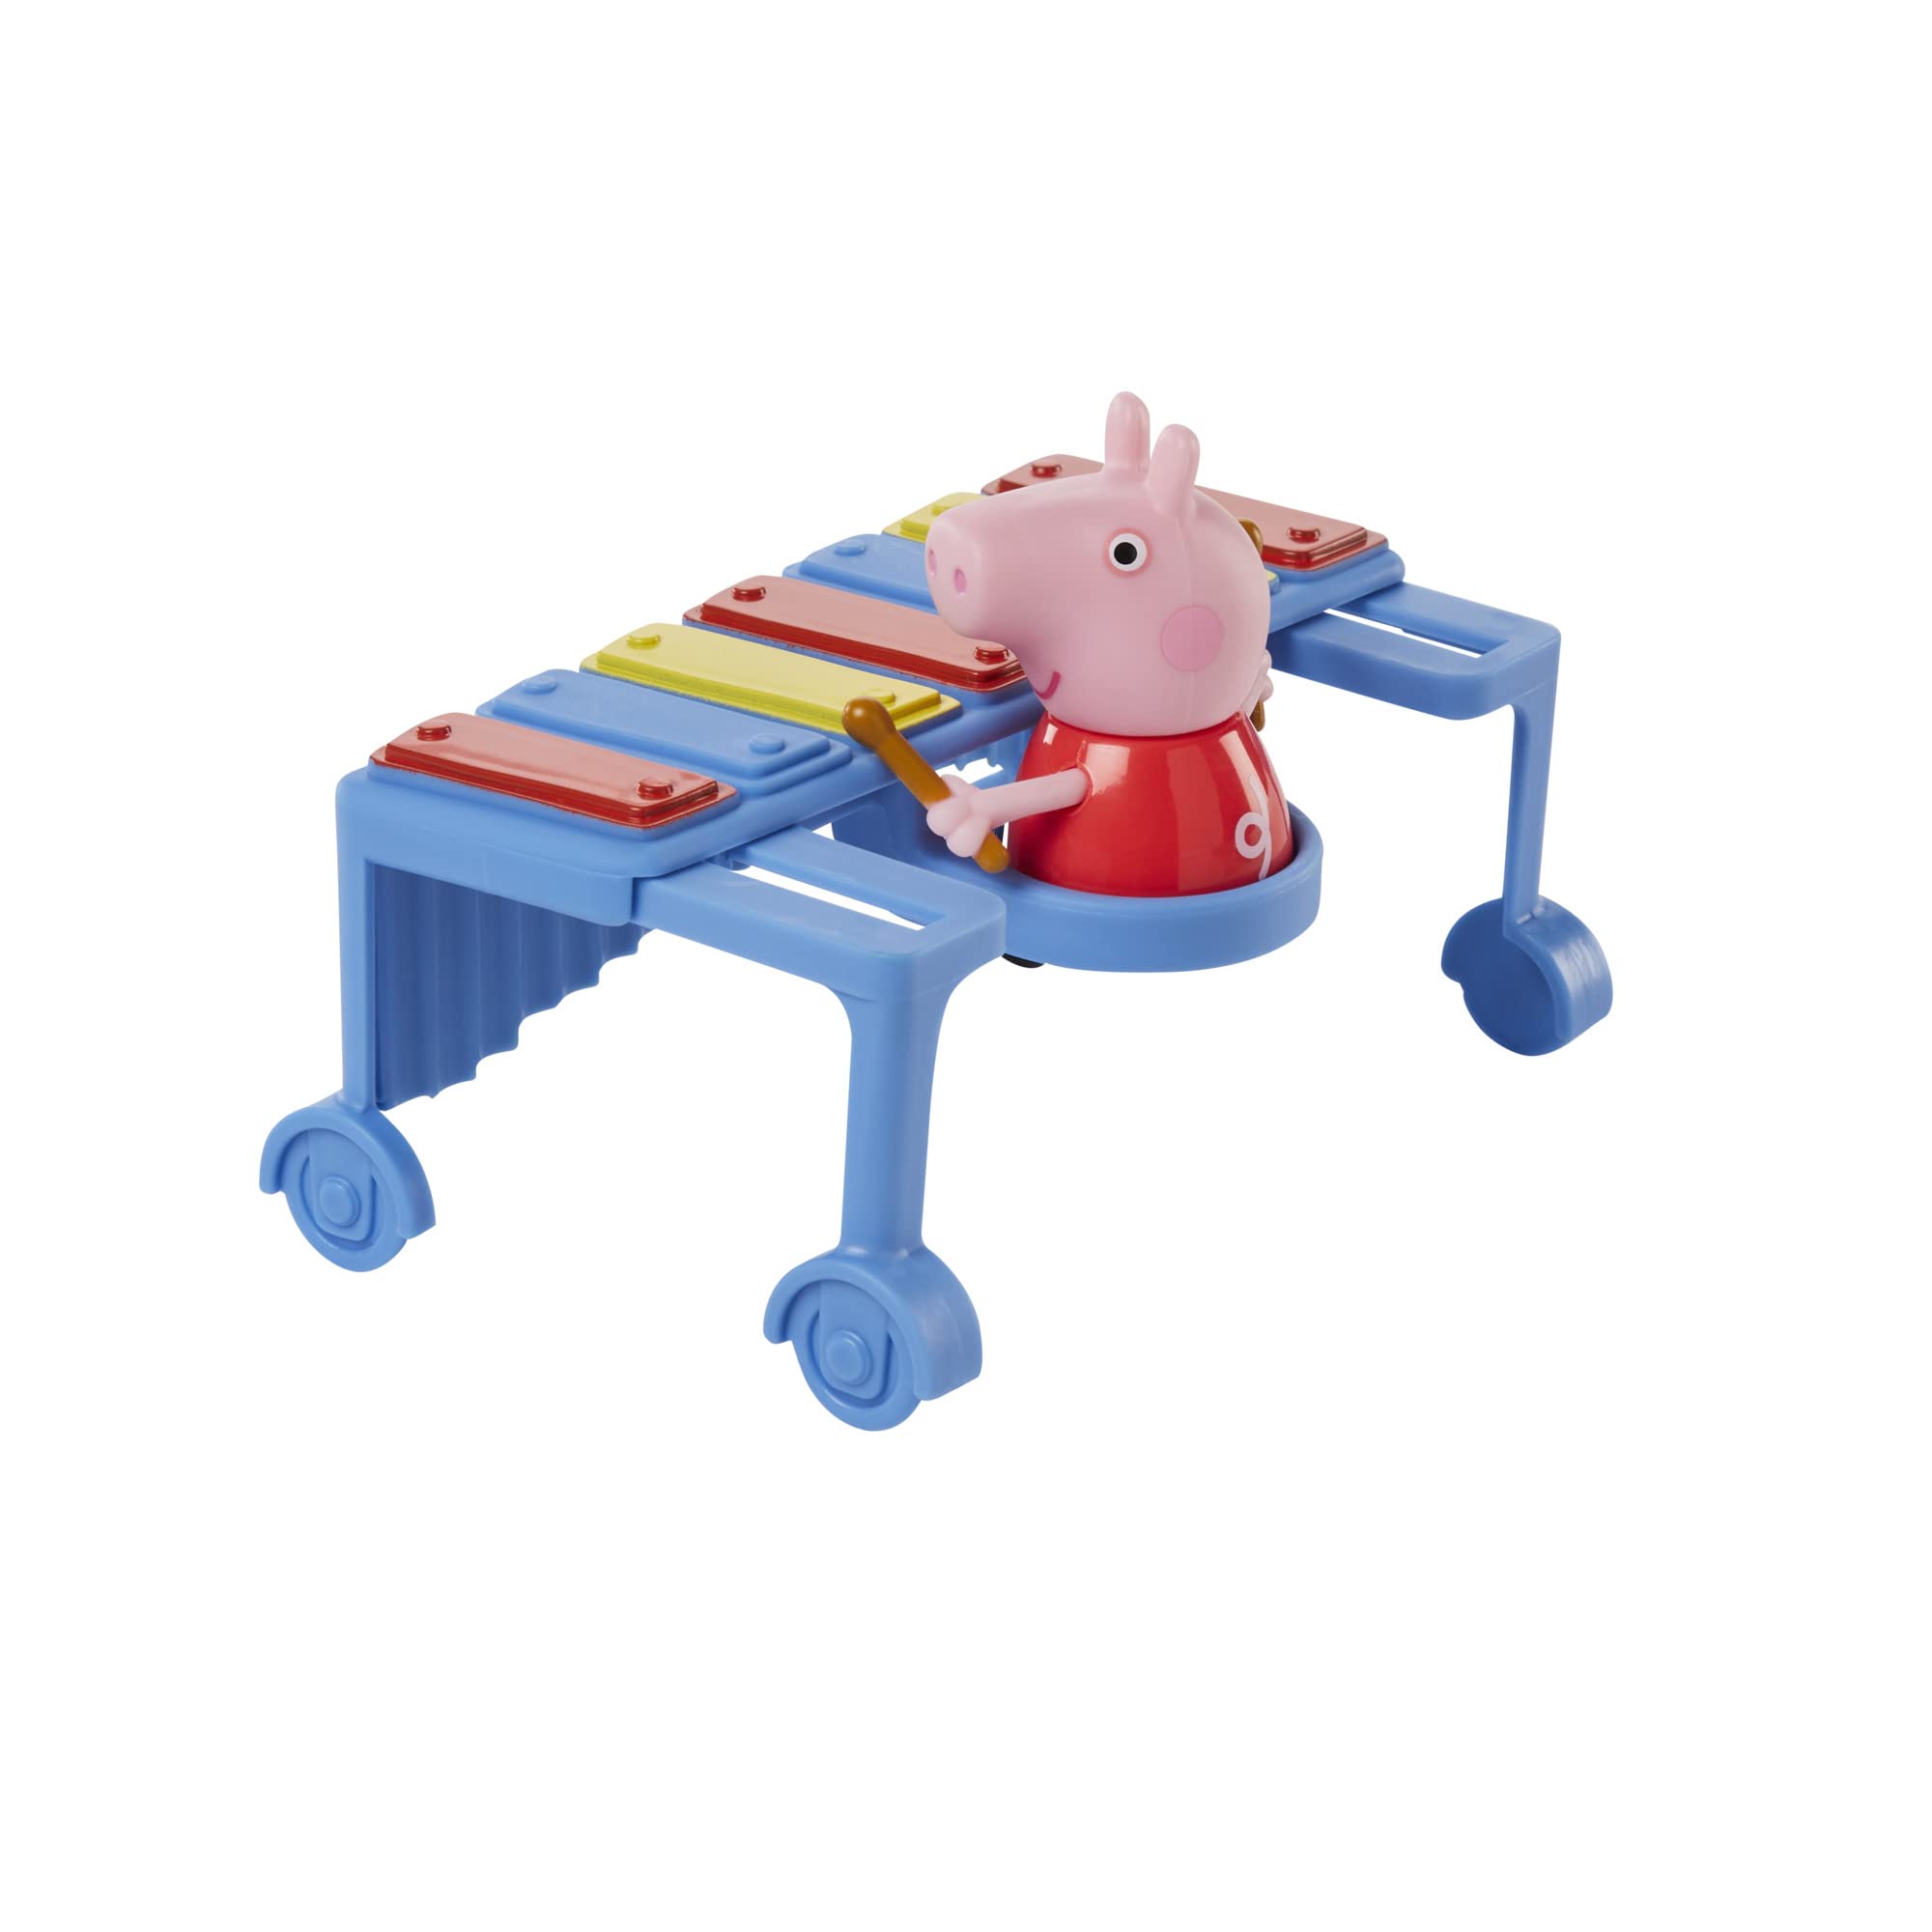 Peppa Pig Peppa's Adventures Peppa's Making Music Fun Preschool Toy, with 2 Figures and 3 Accessories, Ages 3 and Up